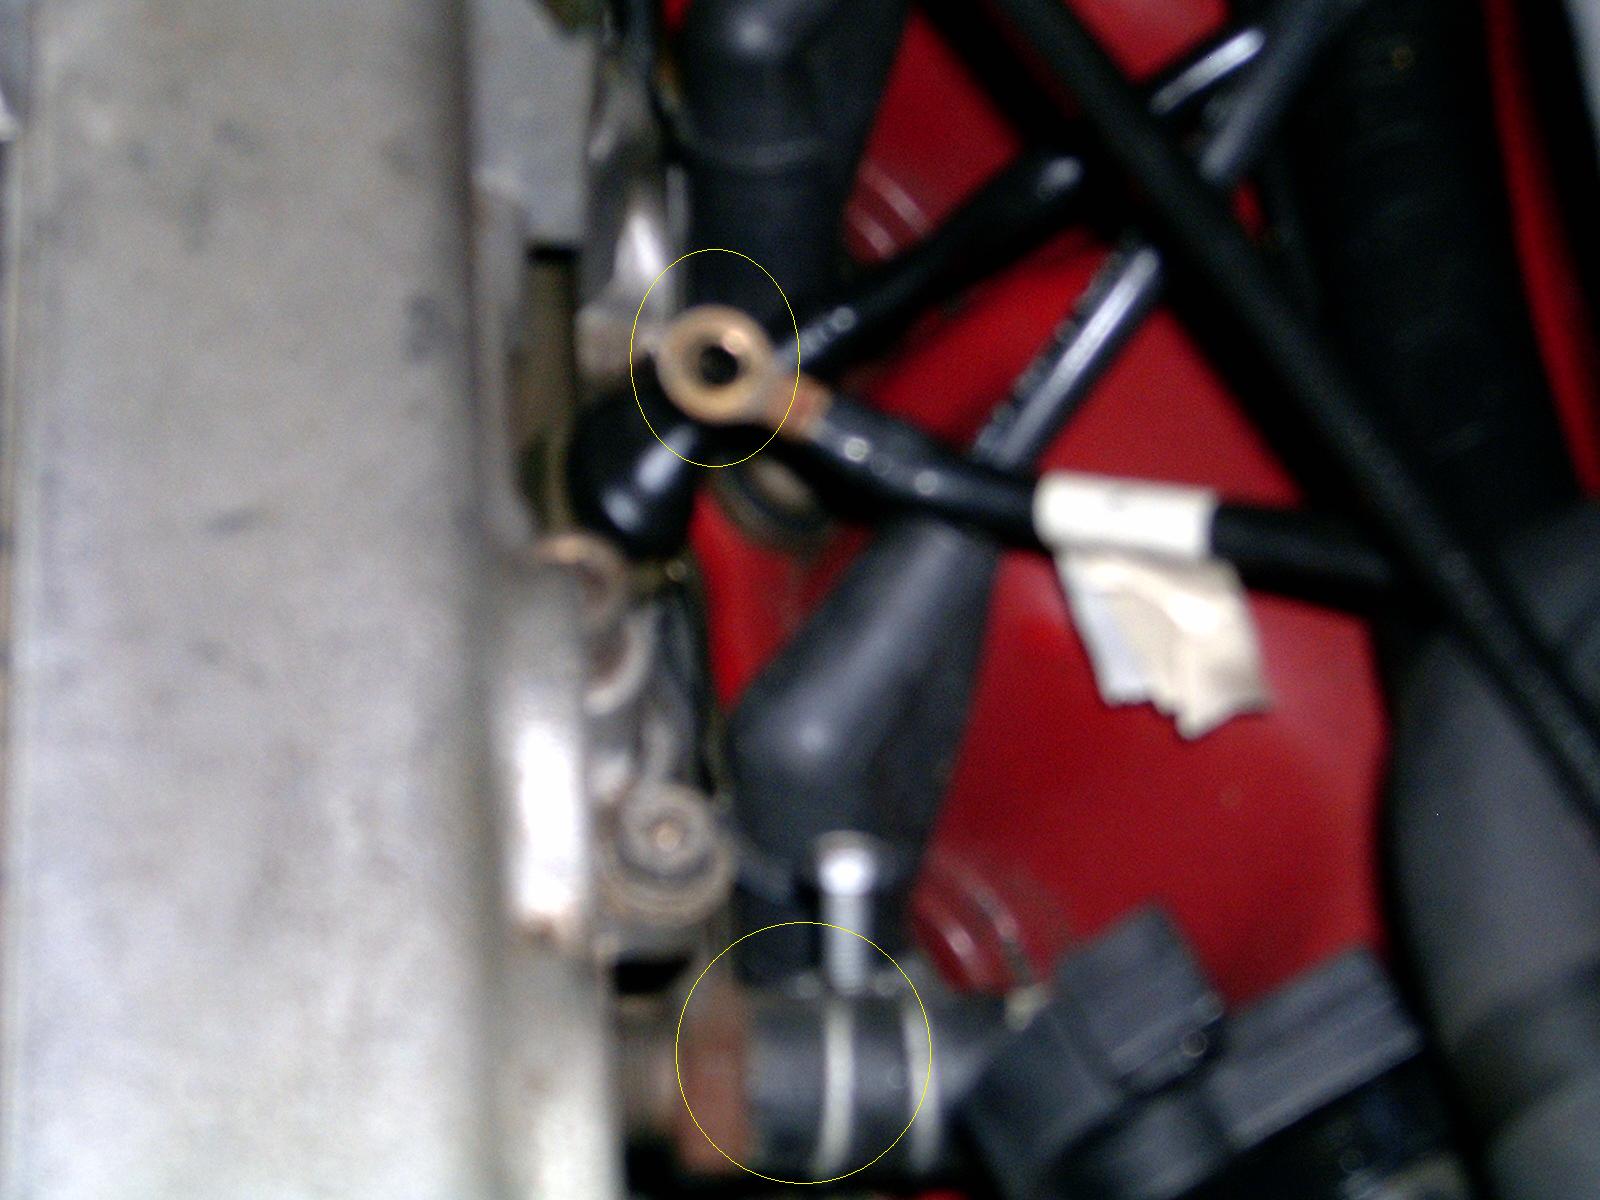 Changing fuel injector nissan maxima